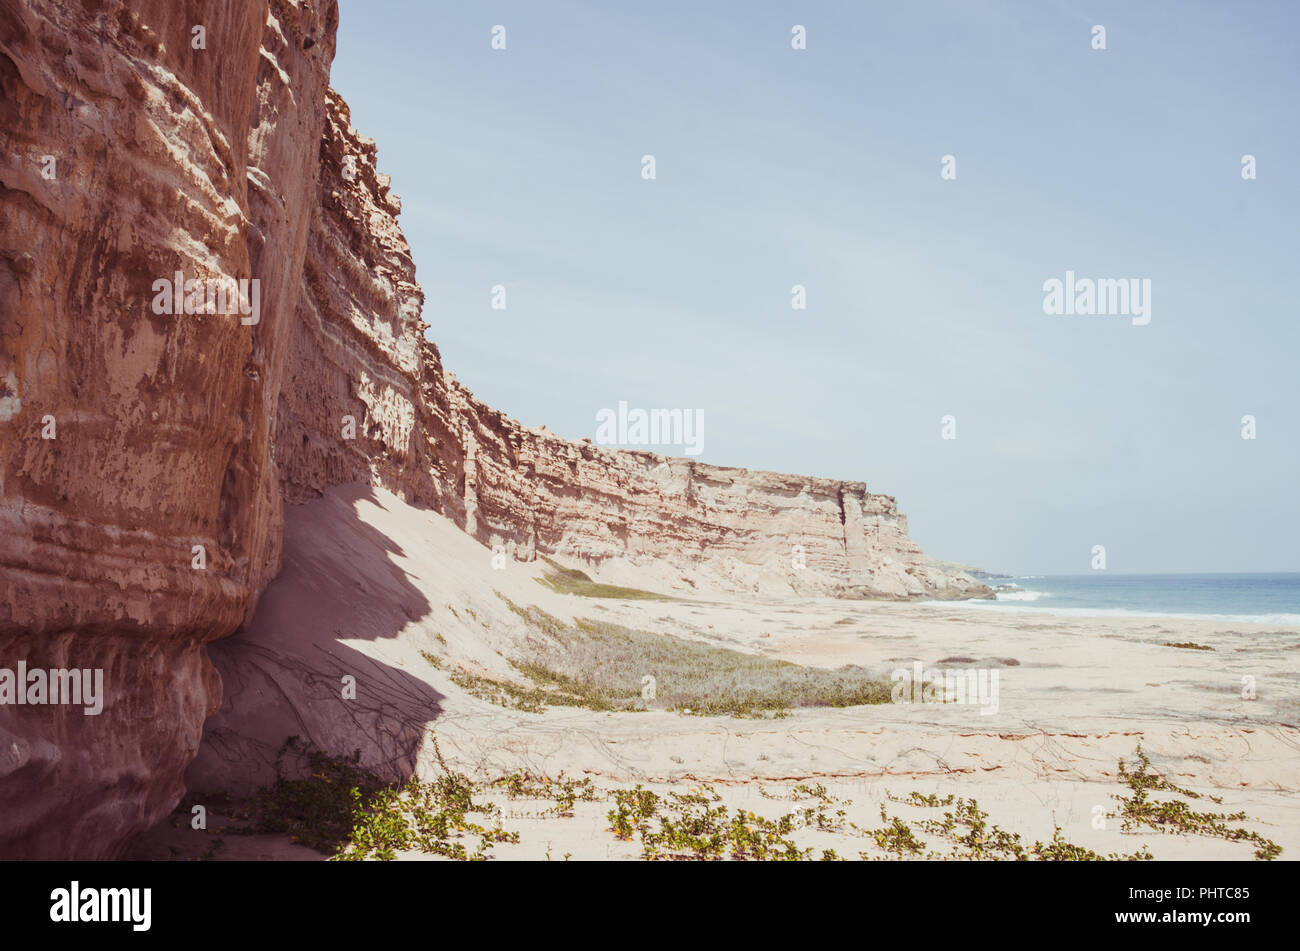 Towering red sandstone cliffs at Angola's coast line in the Namib Desert. Stock Photo